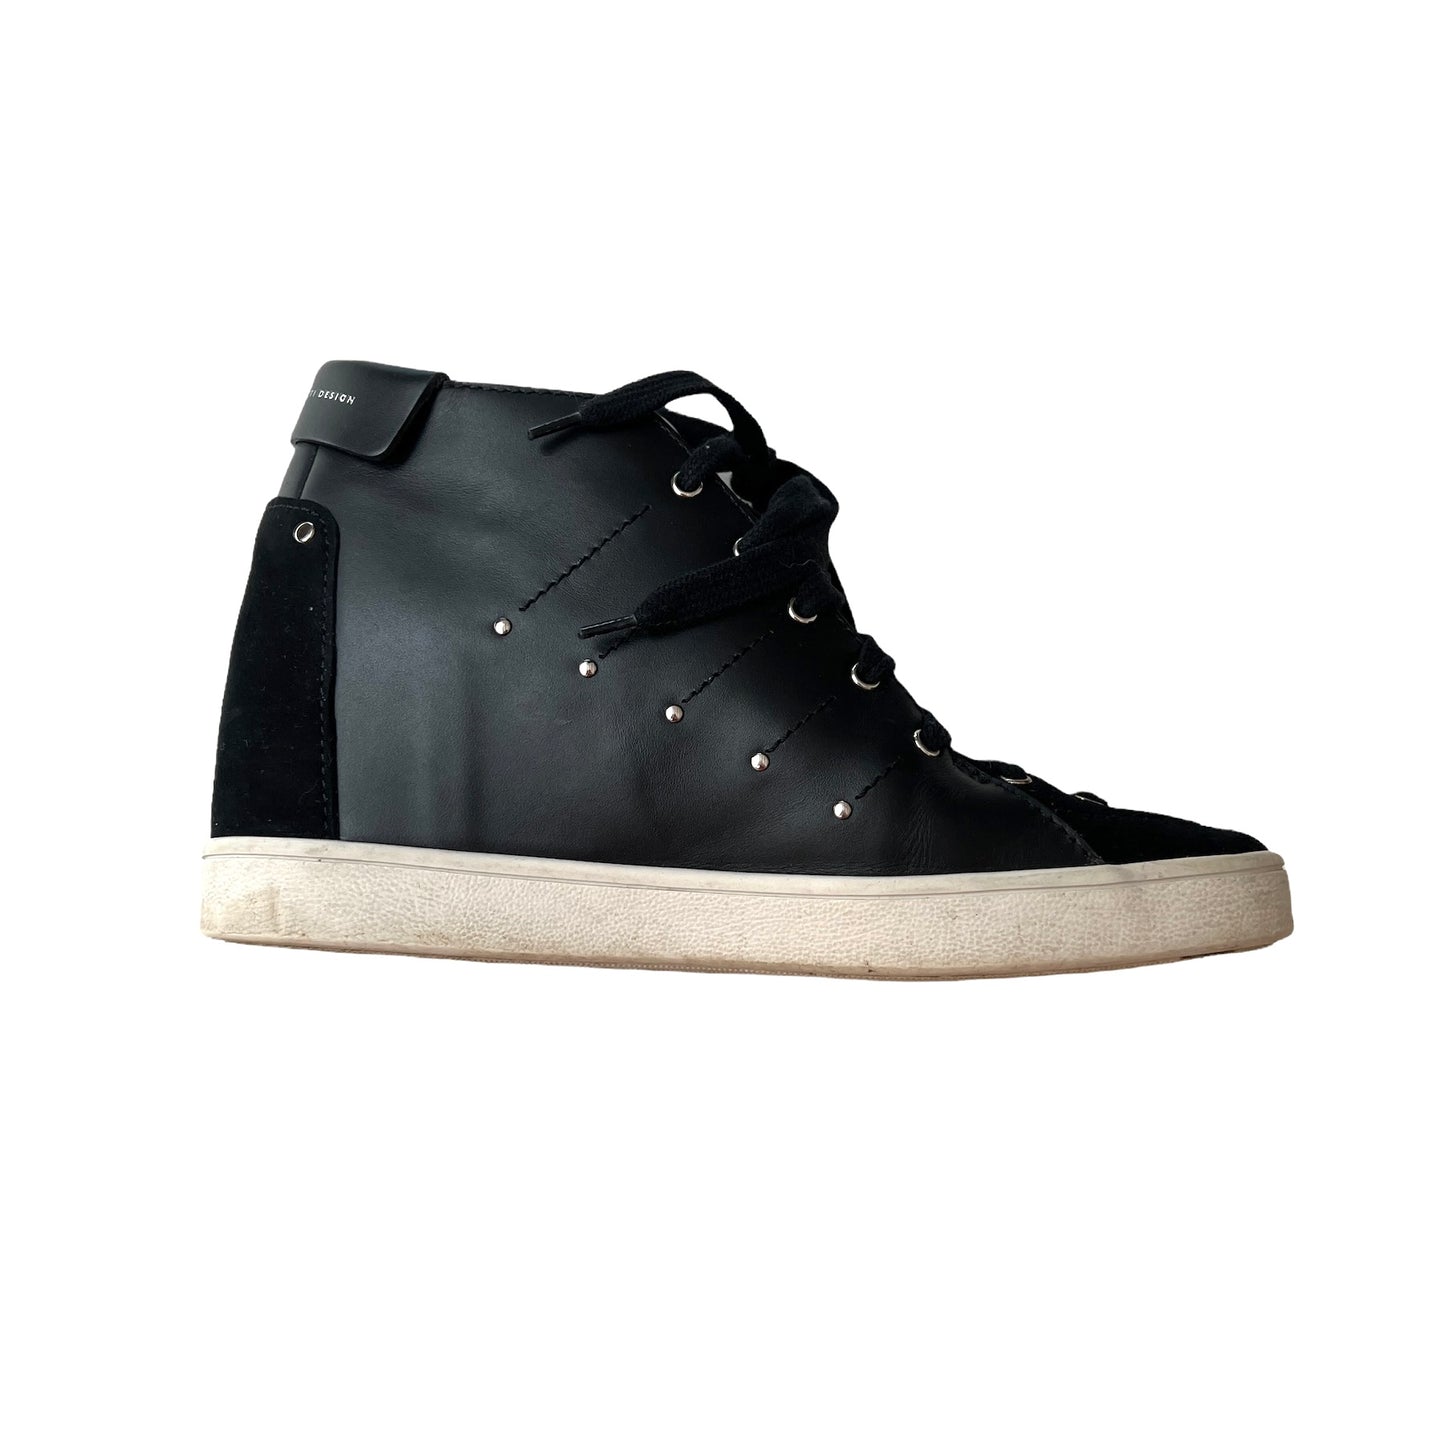 Black Leather and Suede Sneakers - 7.5